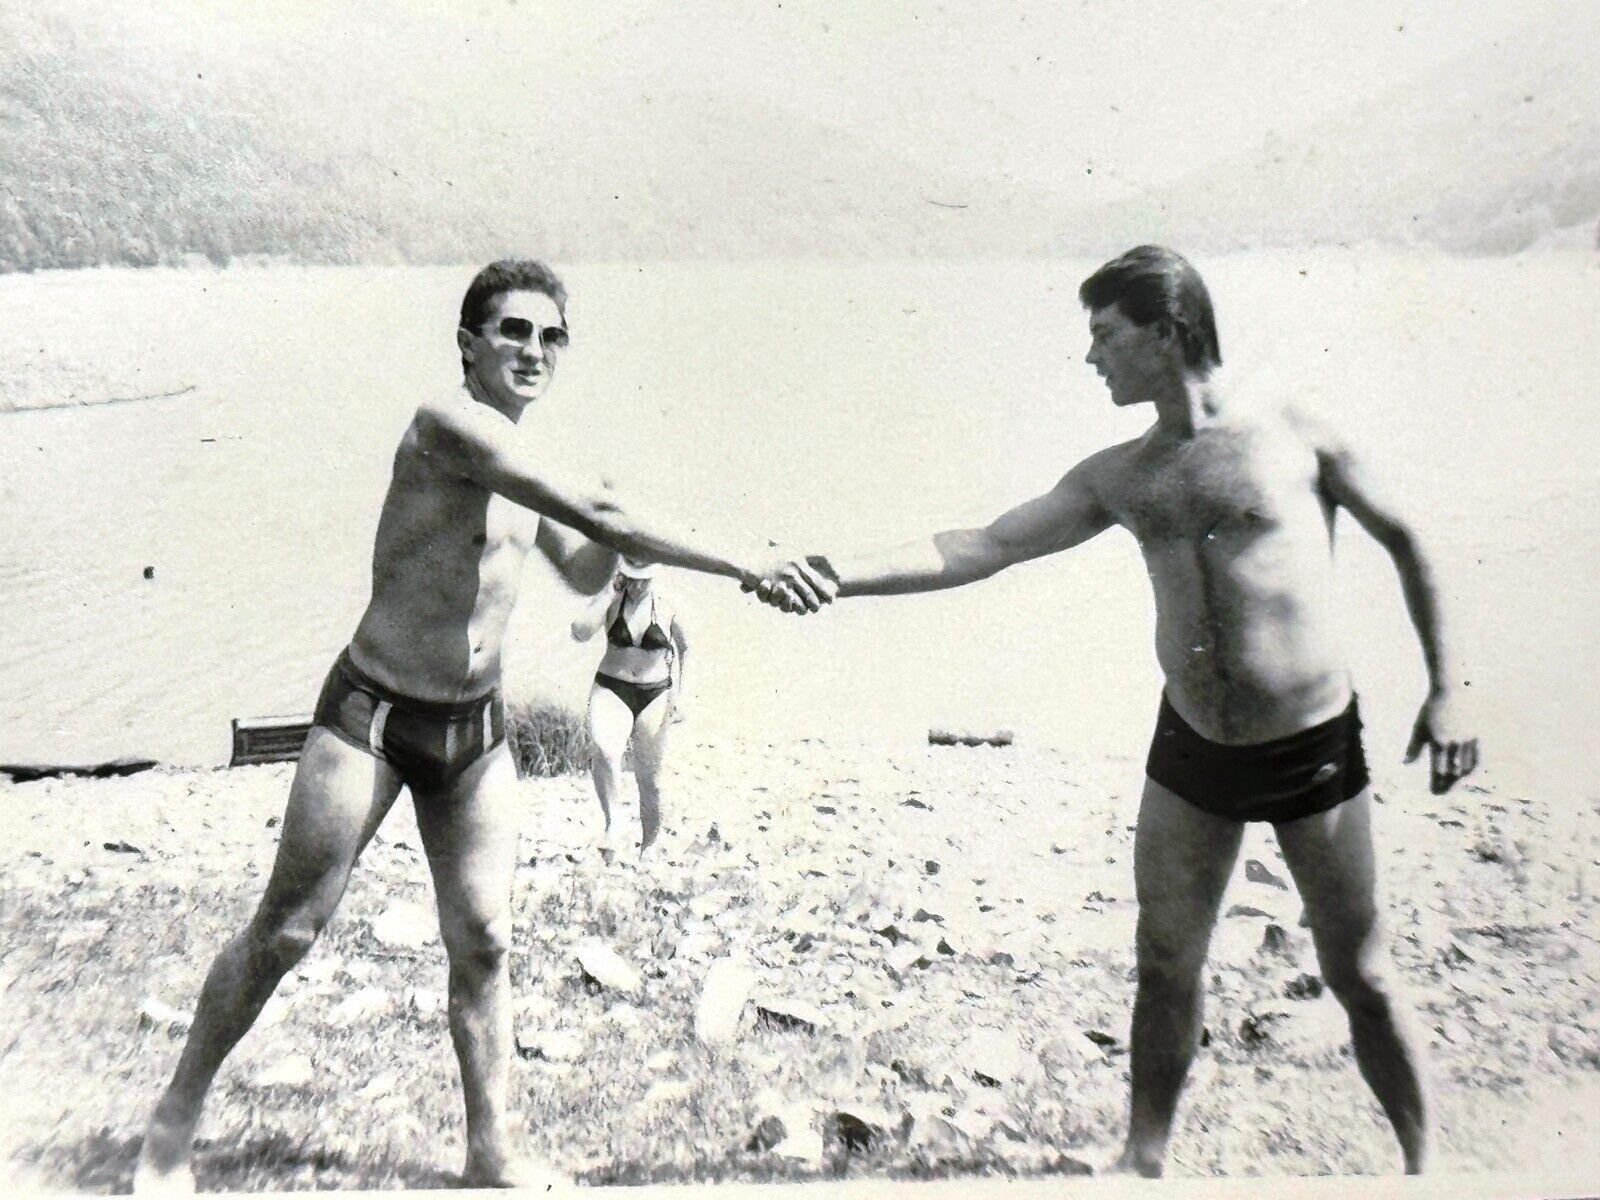 1970s Two Shirtless Handsome Men Trunks Bulge Gay int Beach Vintage B&W Photo